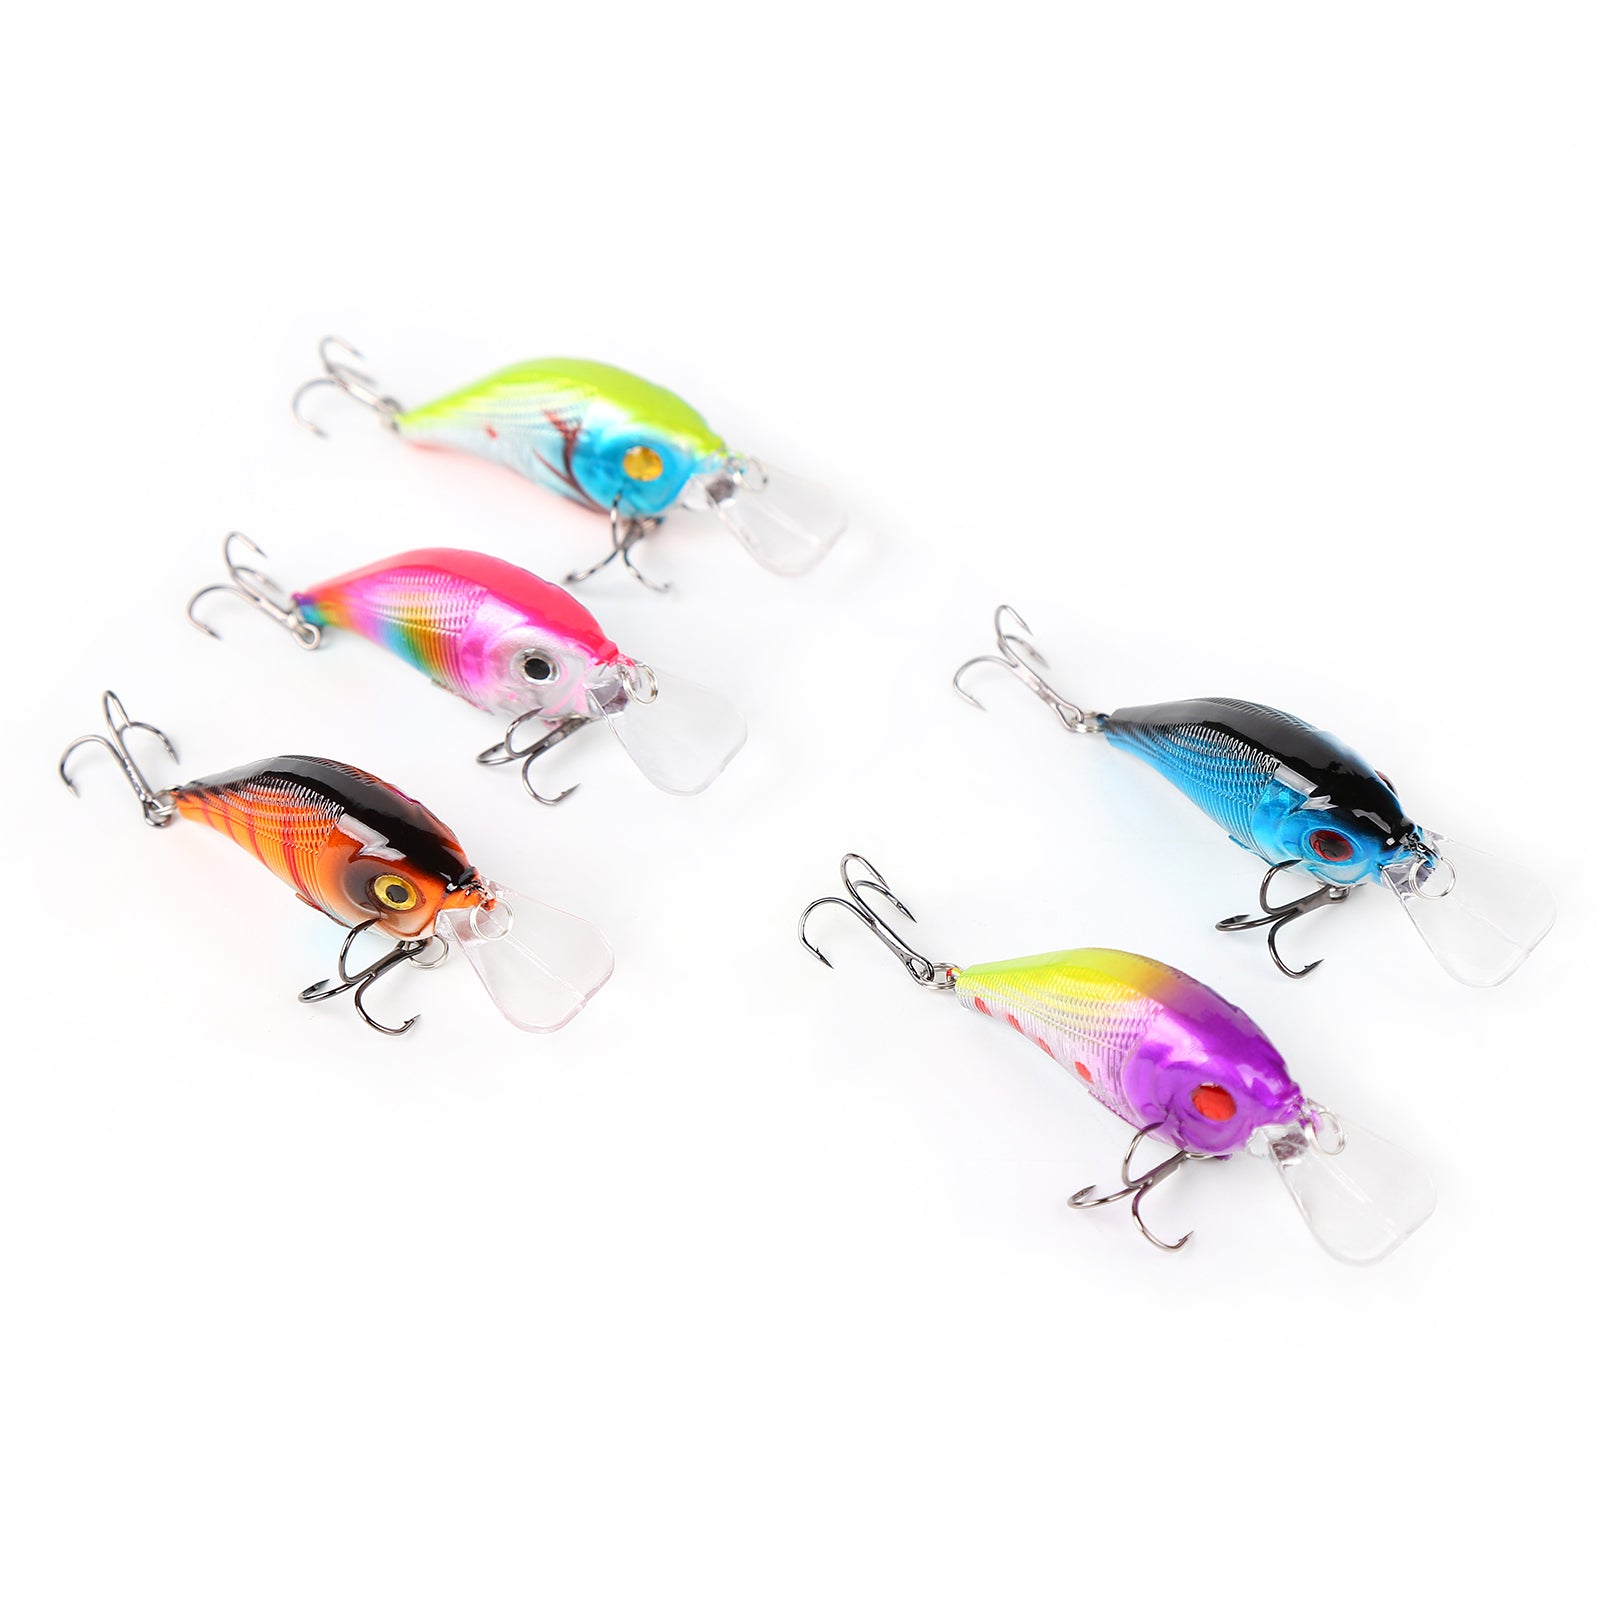 10cm 11g 3PCS/Bag 5 Colors Artificial Soft Fishing Lure TPR Floating Bait  for Outdoor Fishing Activity - China Soft Bait and Soft Lure price